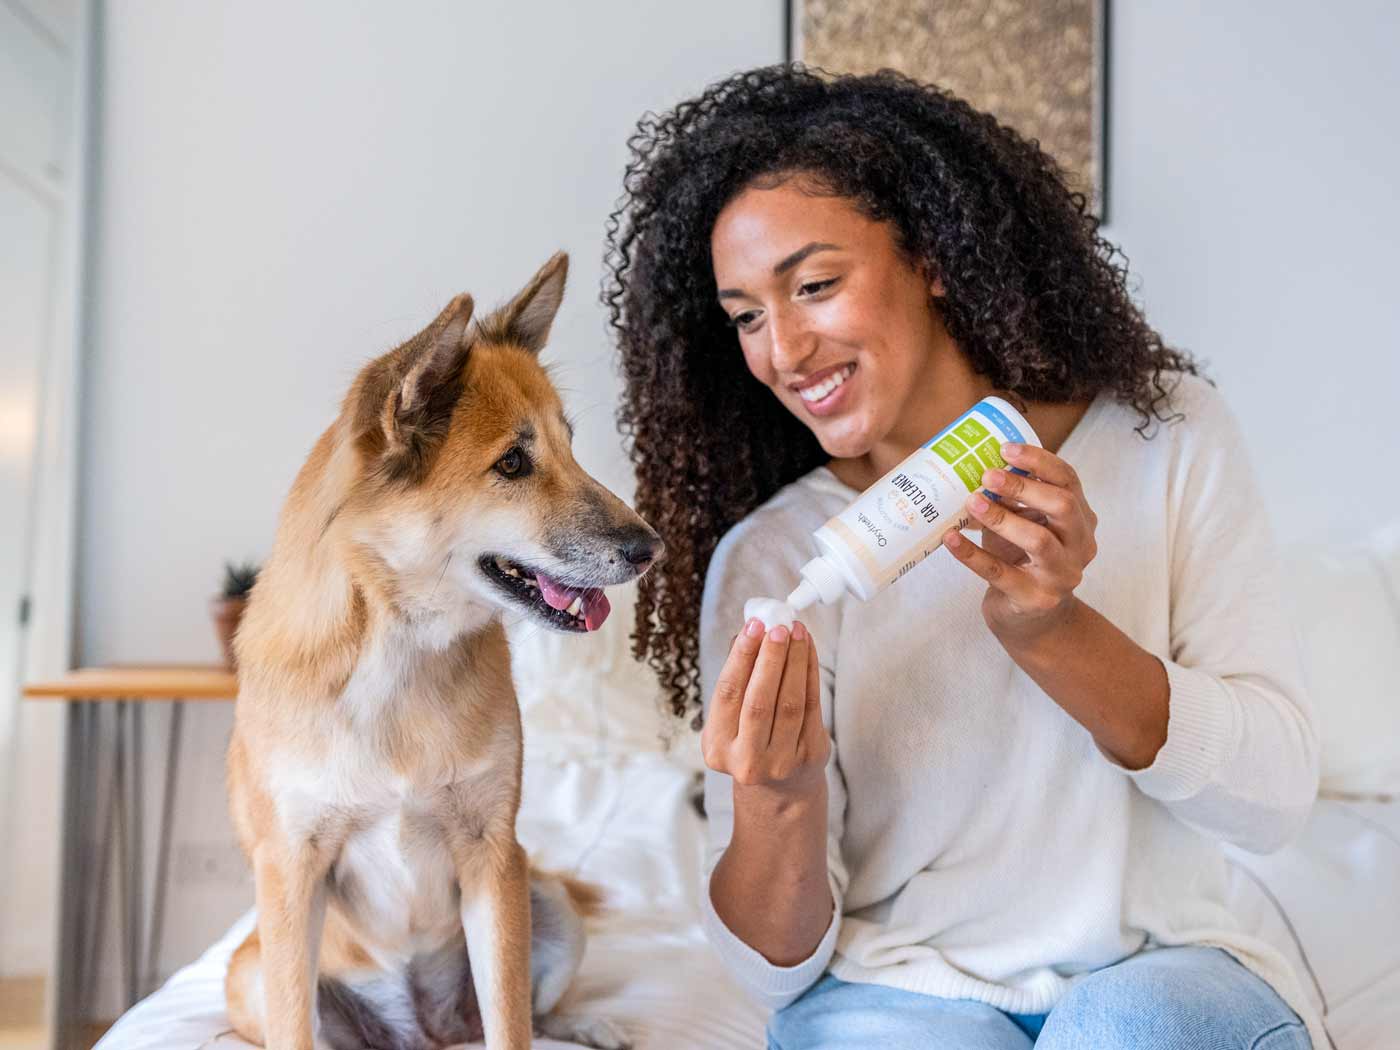 woman-smiling-applying-oxyfresh-ear-cleaner-to-a-cotton-ball-while-her-dog-looks-happily-towards-her